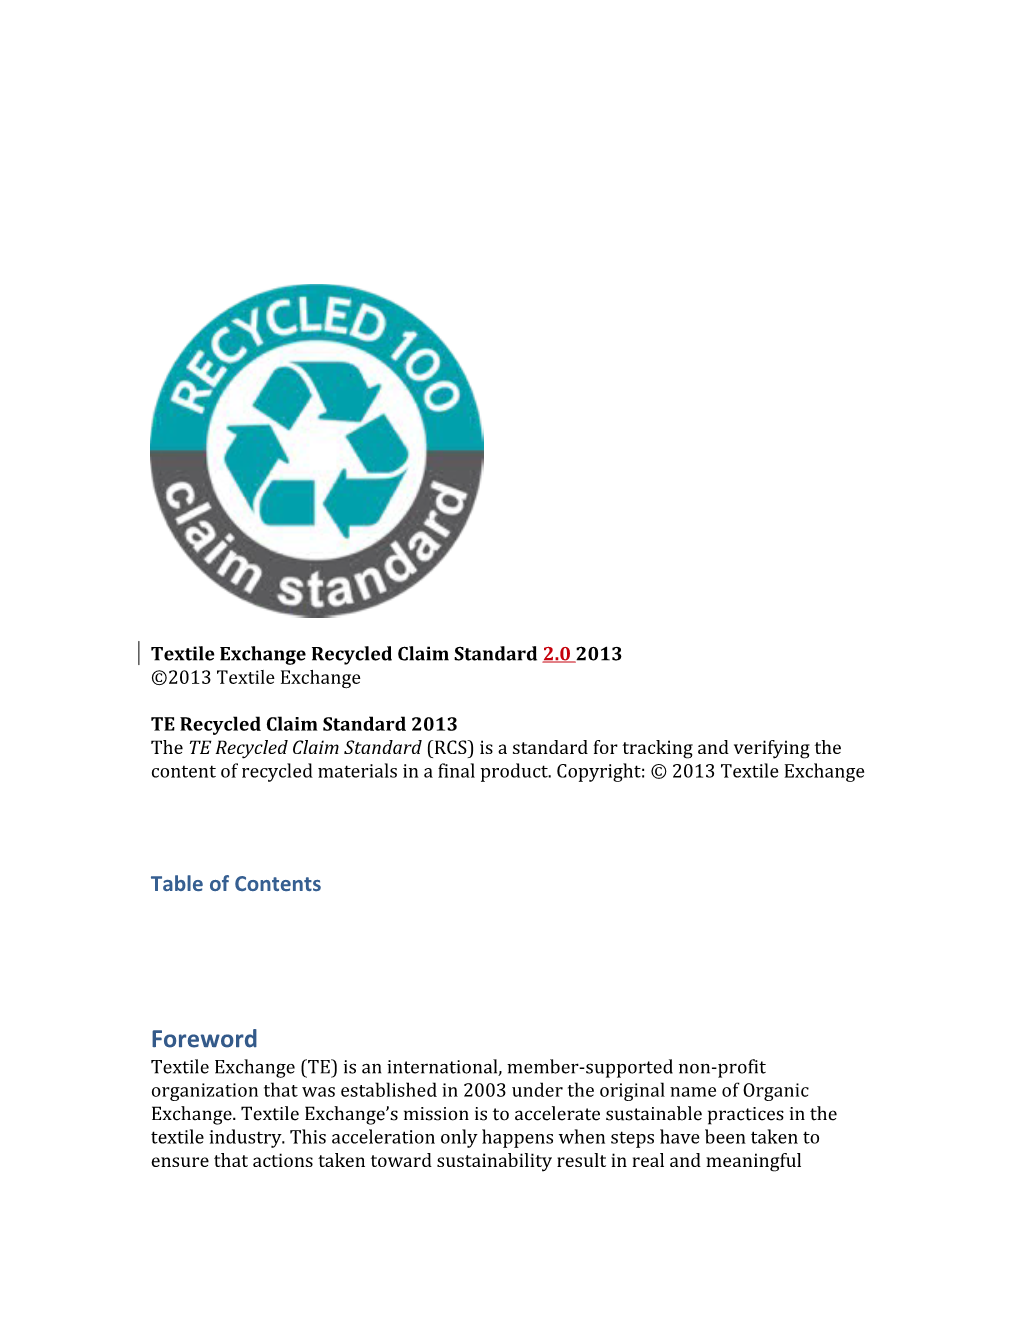 Textile Exchange Recycled Claim Standard 2.0 2013